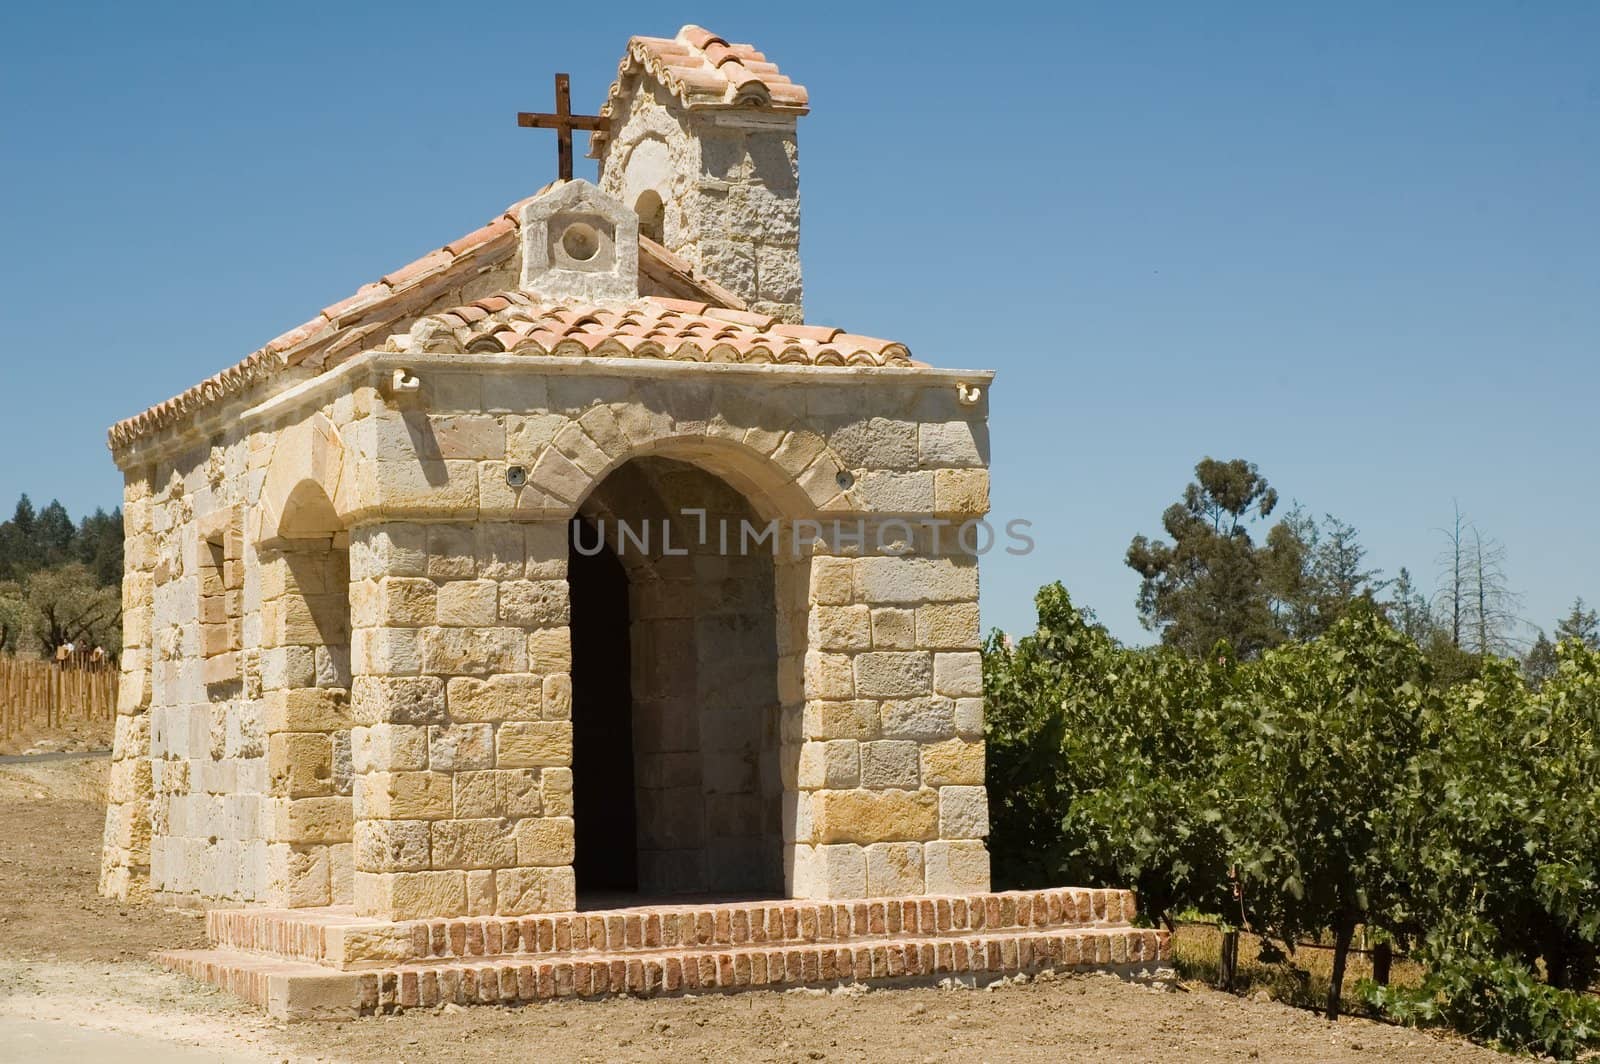 A stone chapel in a vineyard setting in Northern california